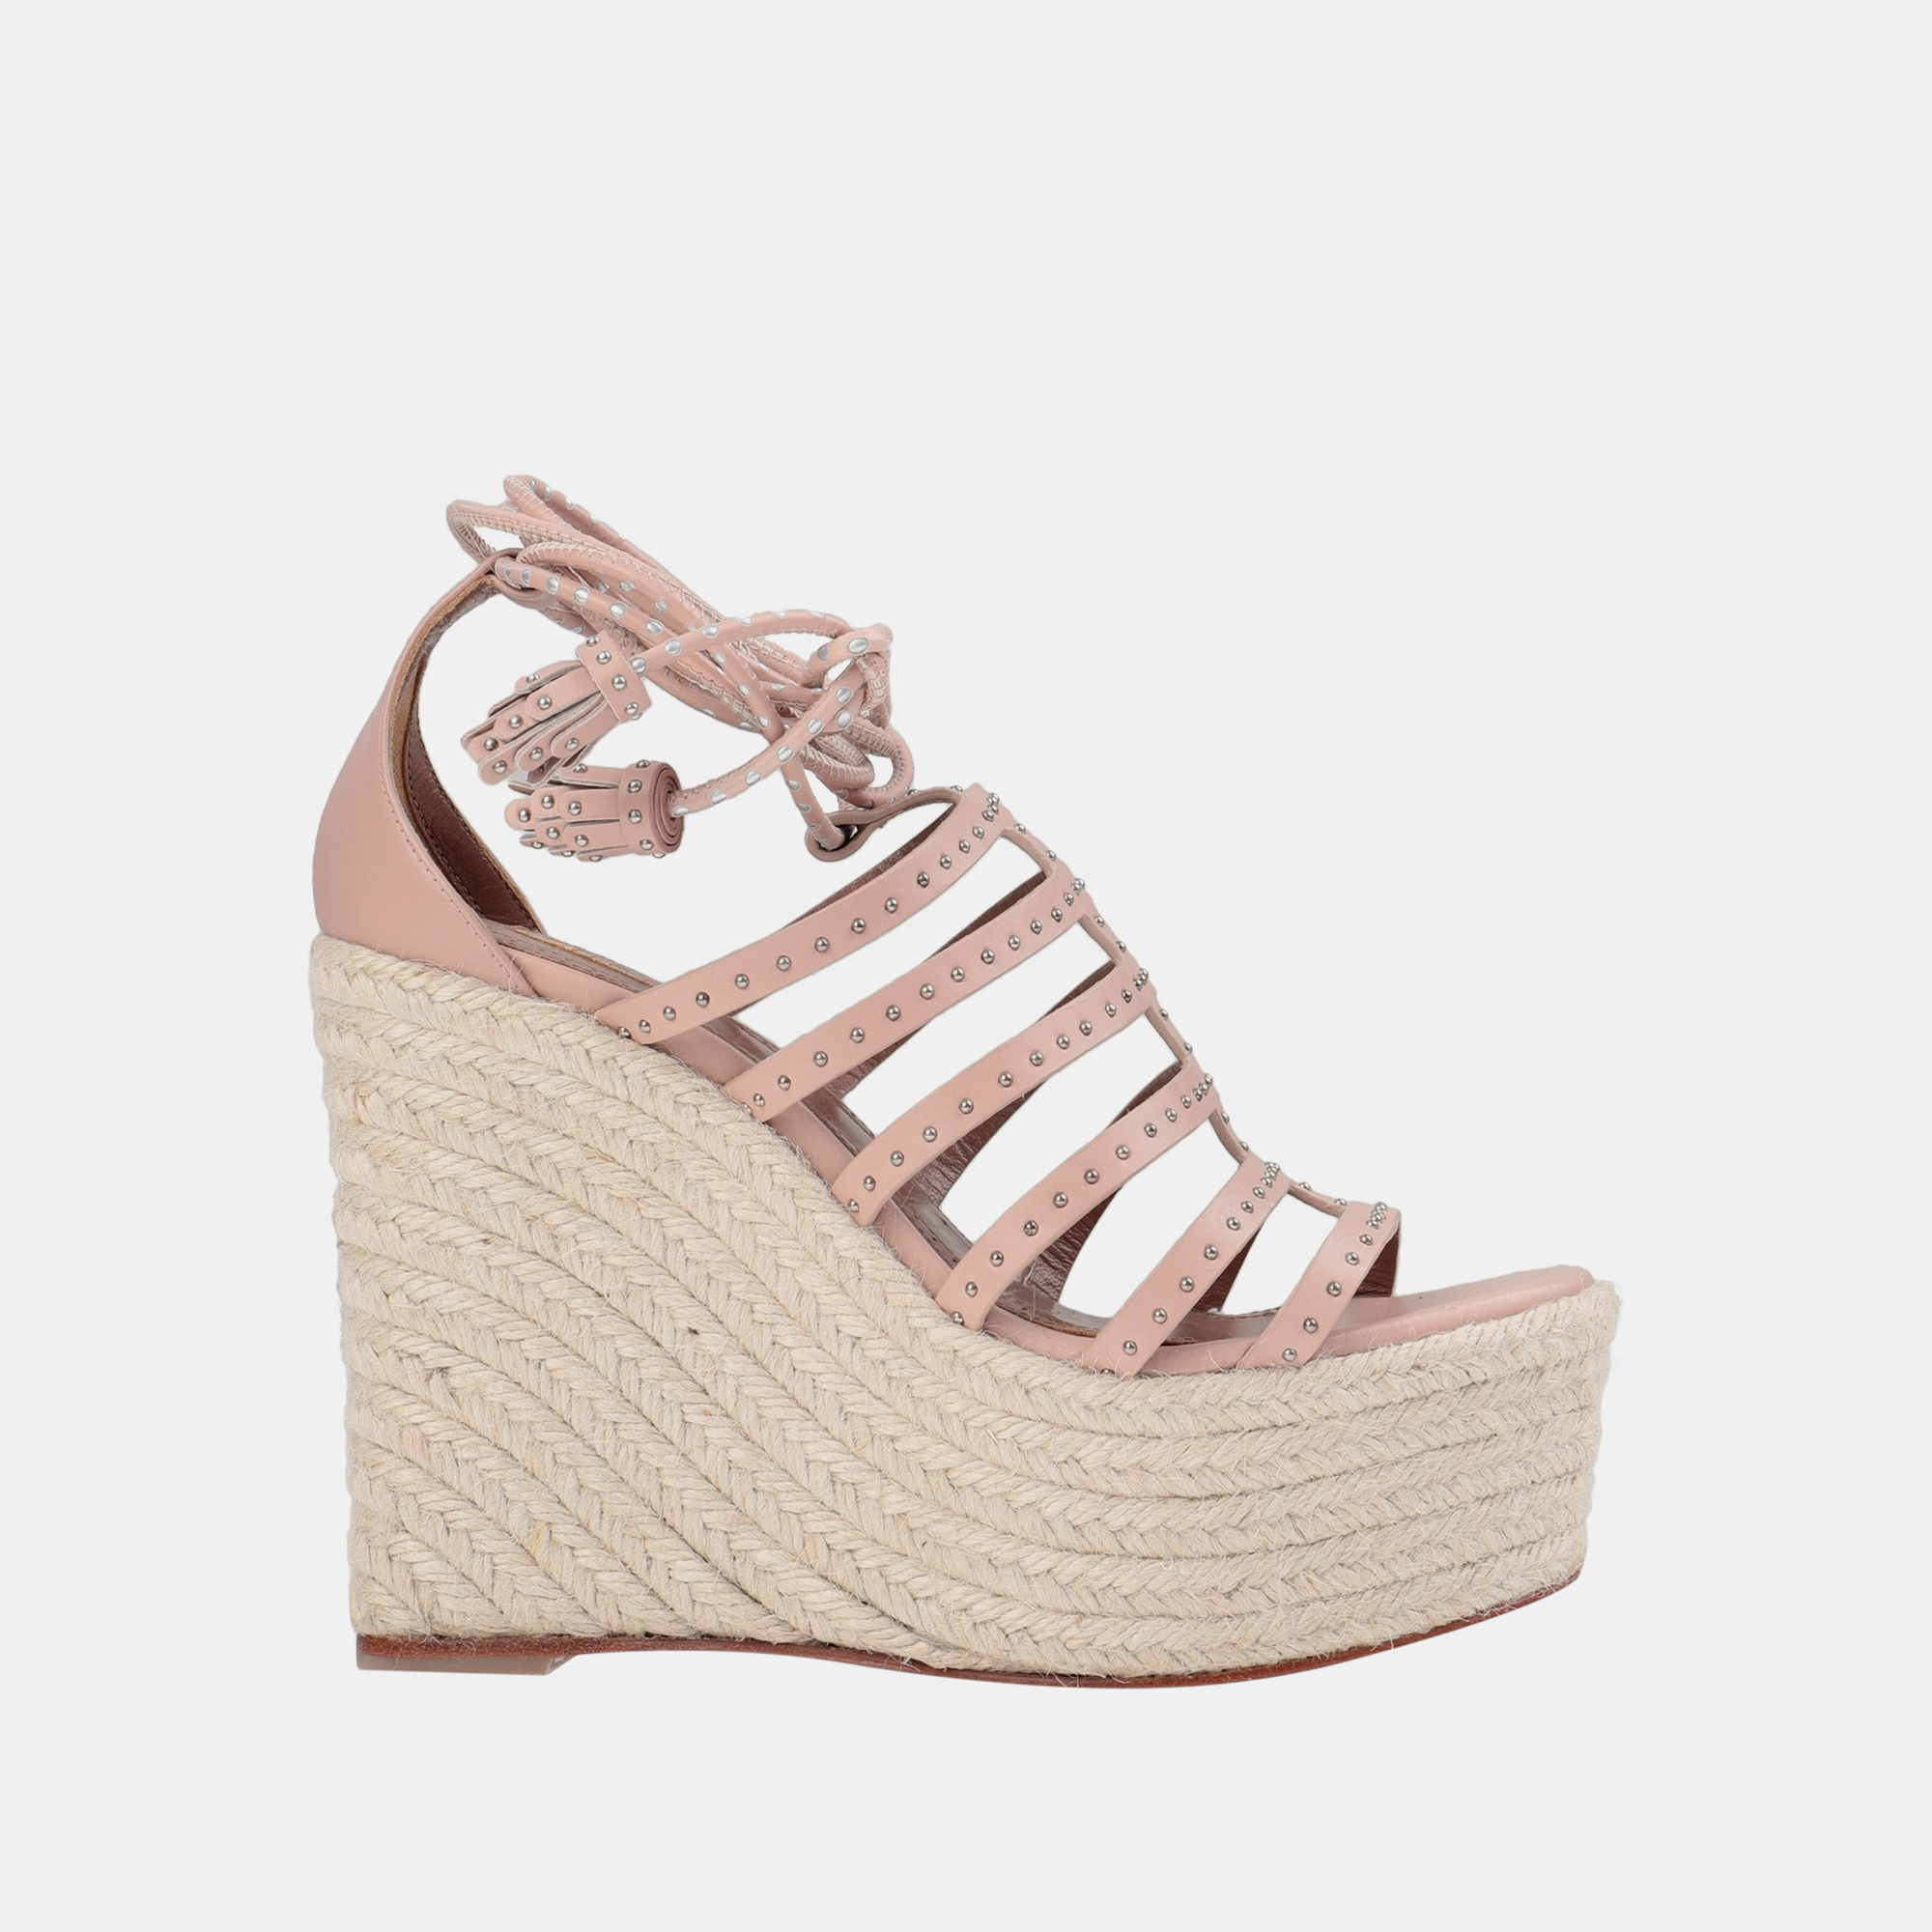 Alaia dusty pink leather wedge sandals 36